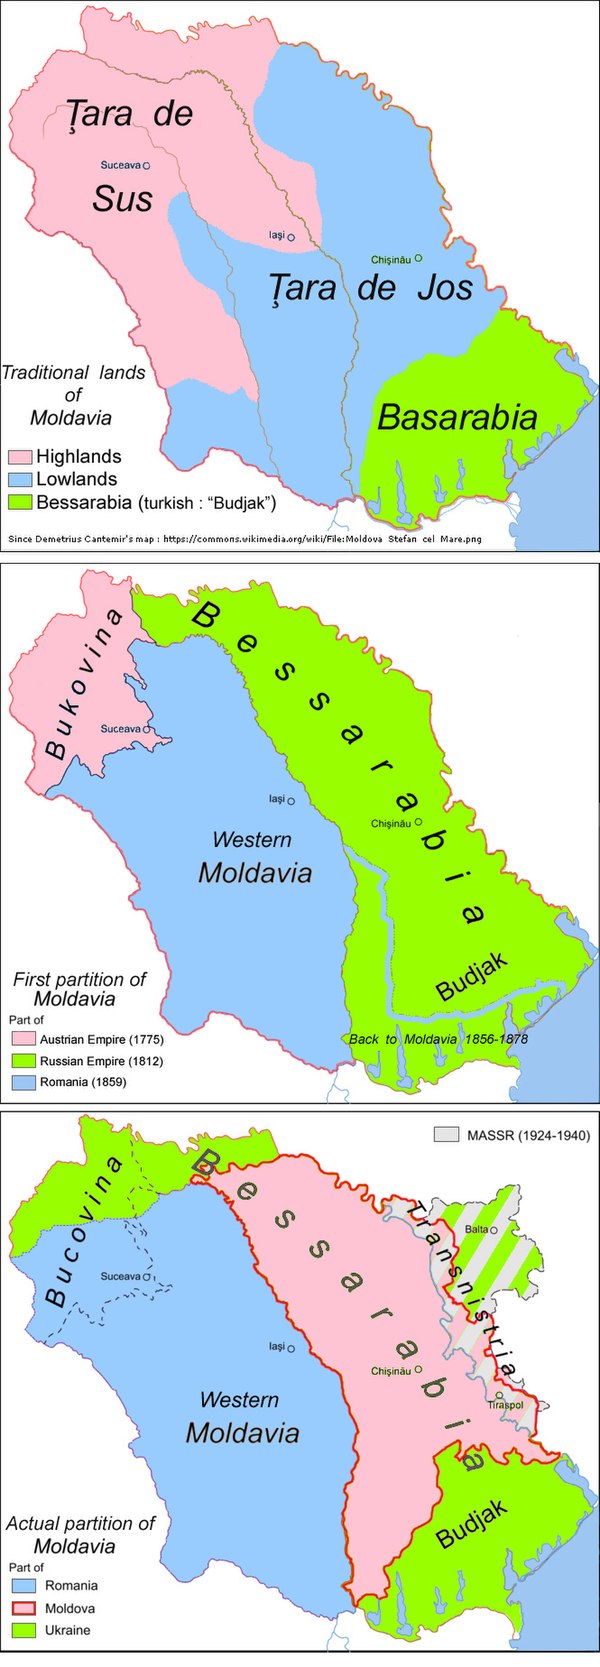 Bukovina within the historical region of Moldavia over the passing of time.